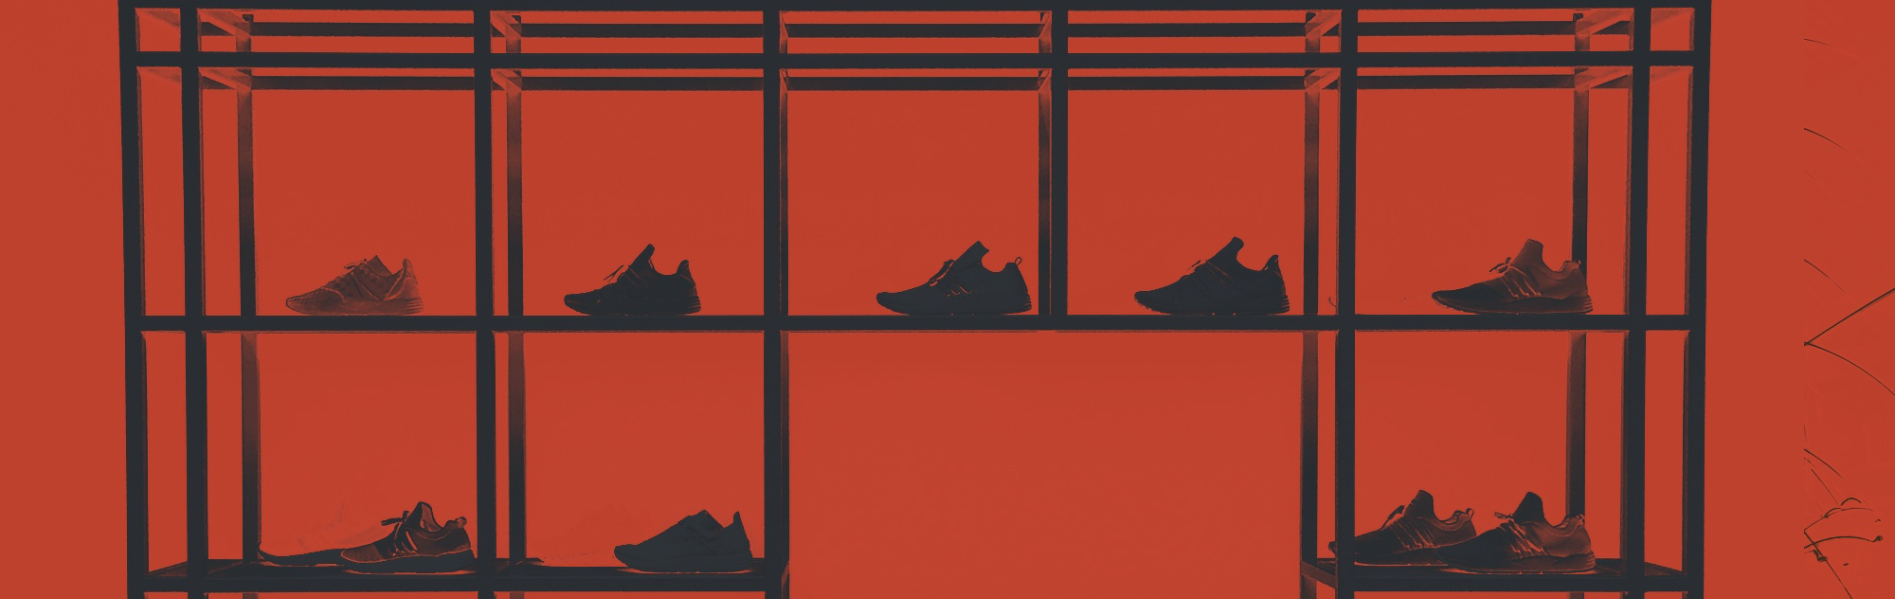 Shoes lined up in shelves with red background